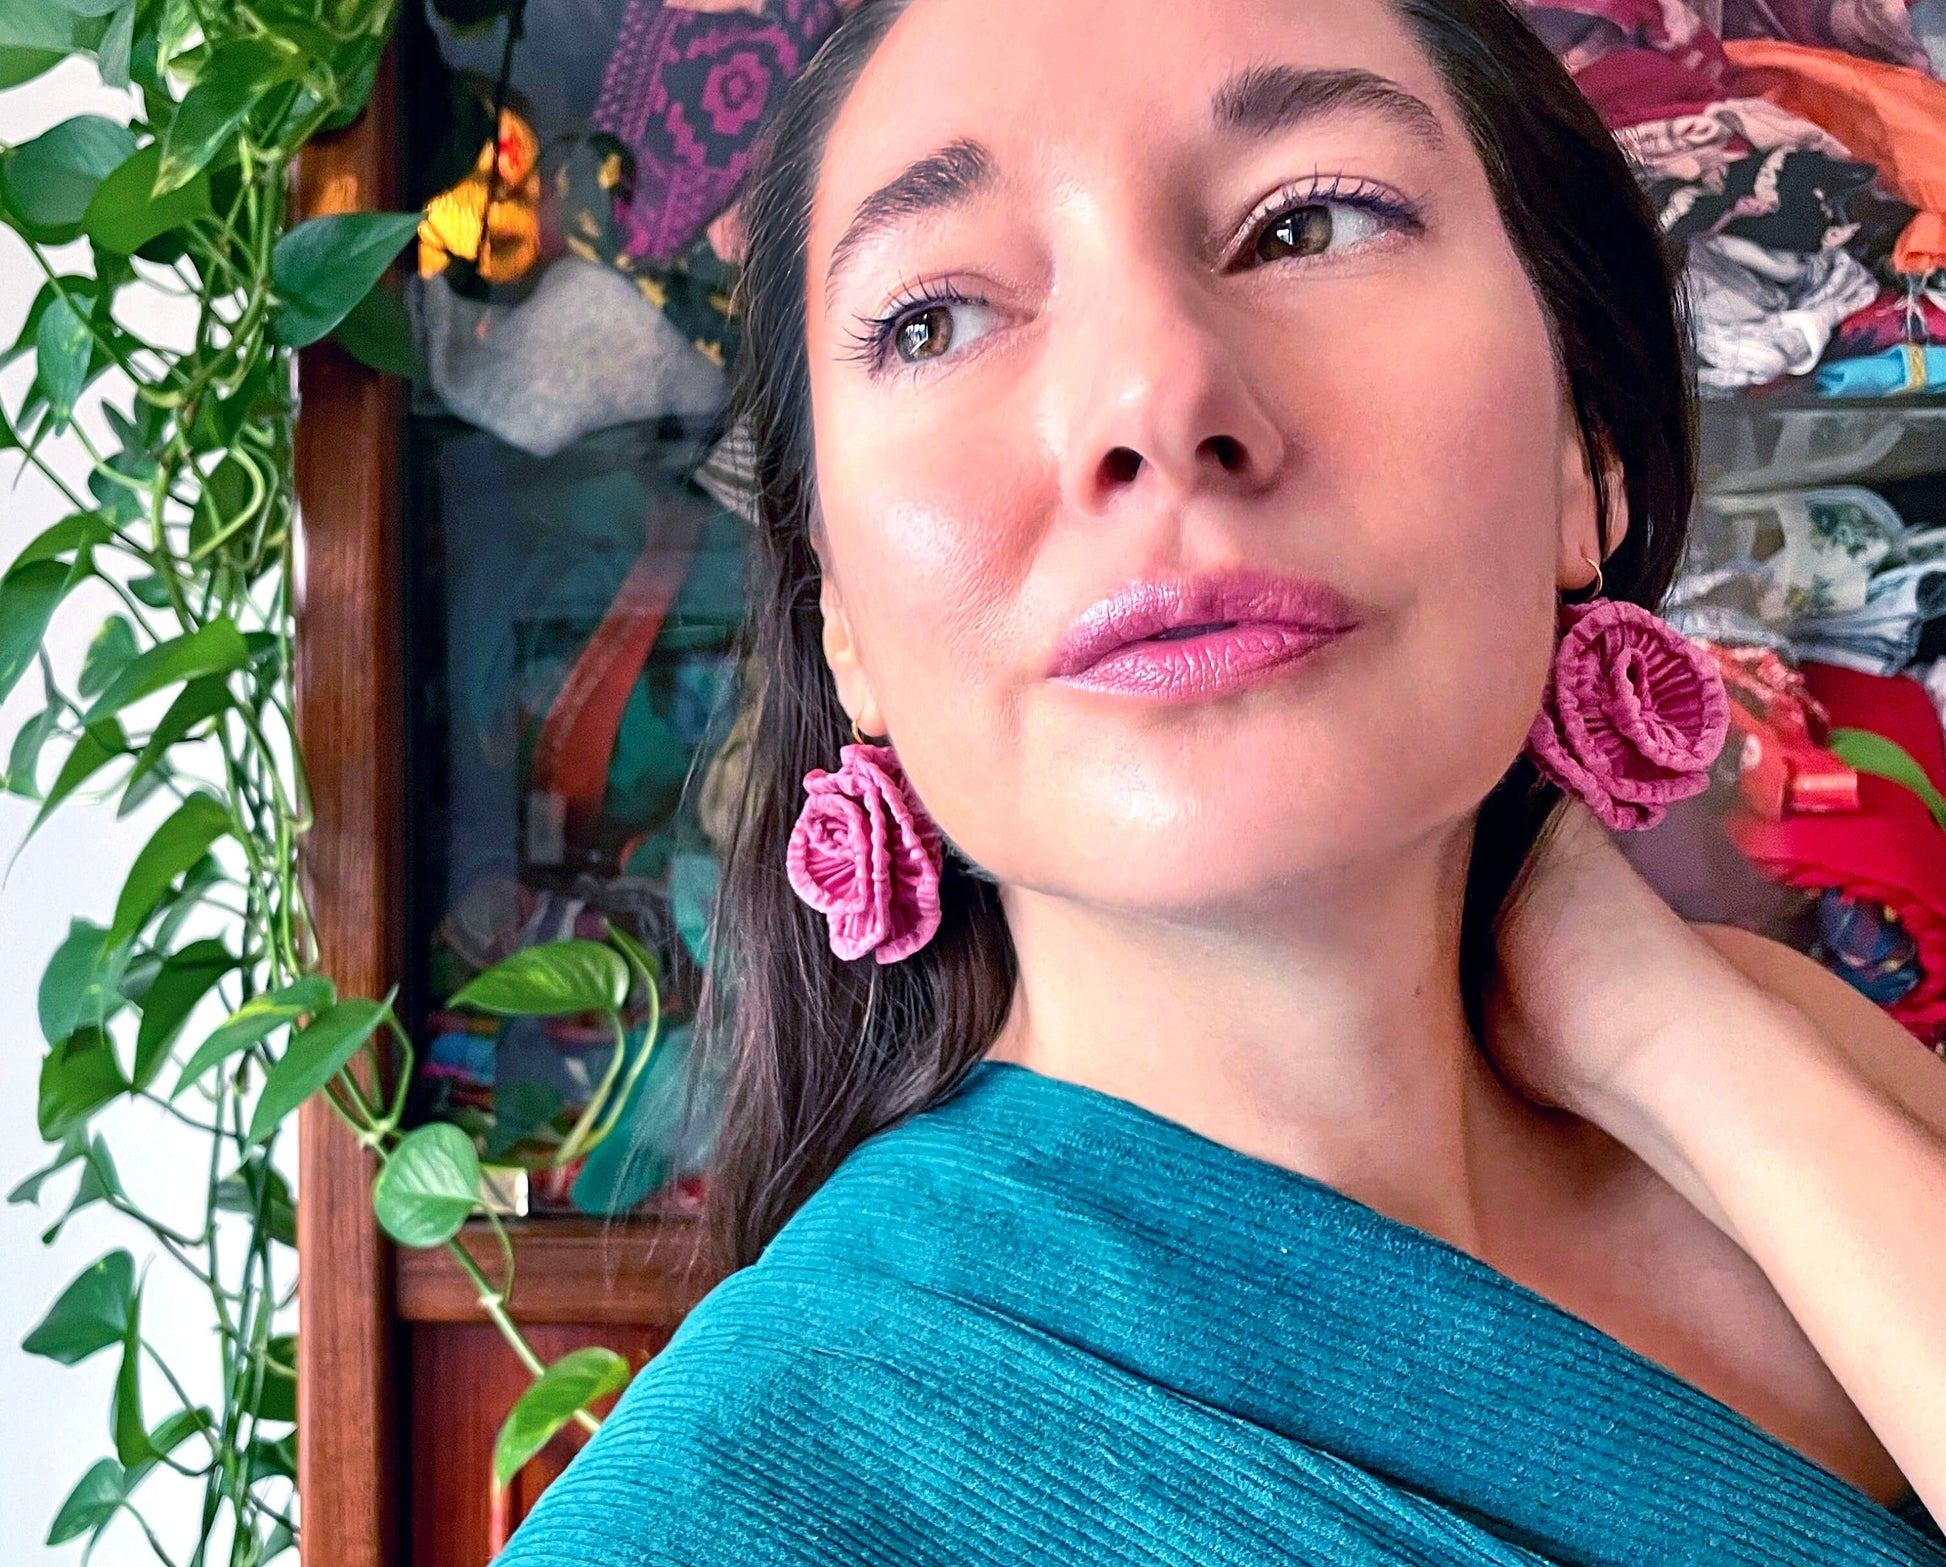 Blooming Pink Recycled Fabric Earrings